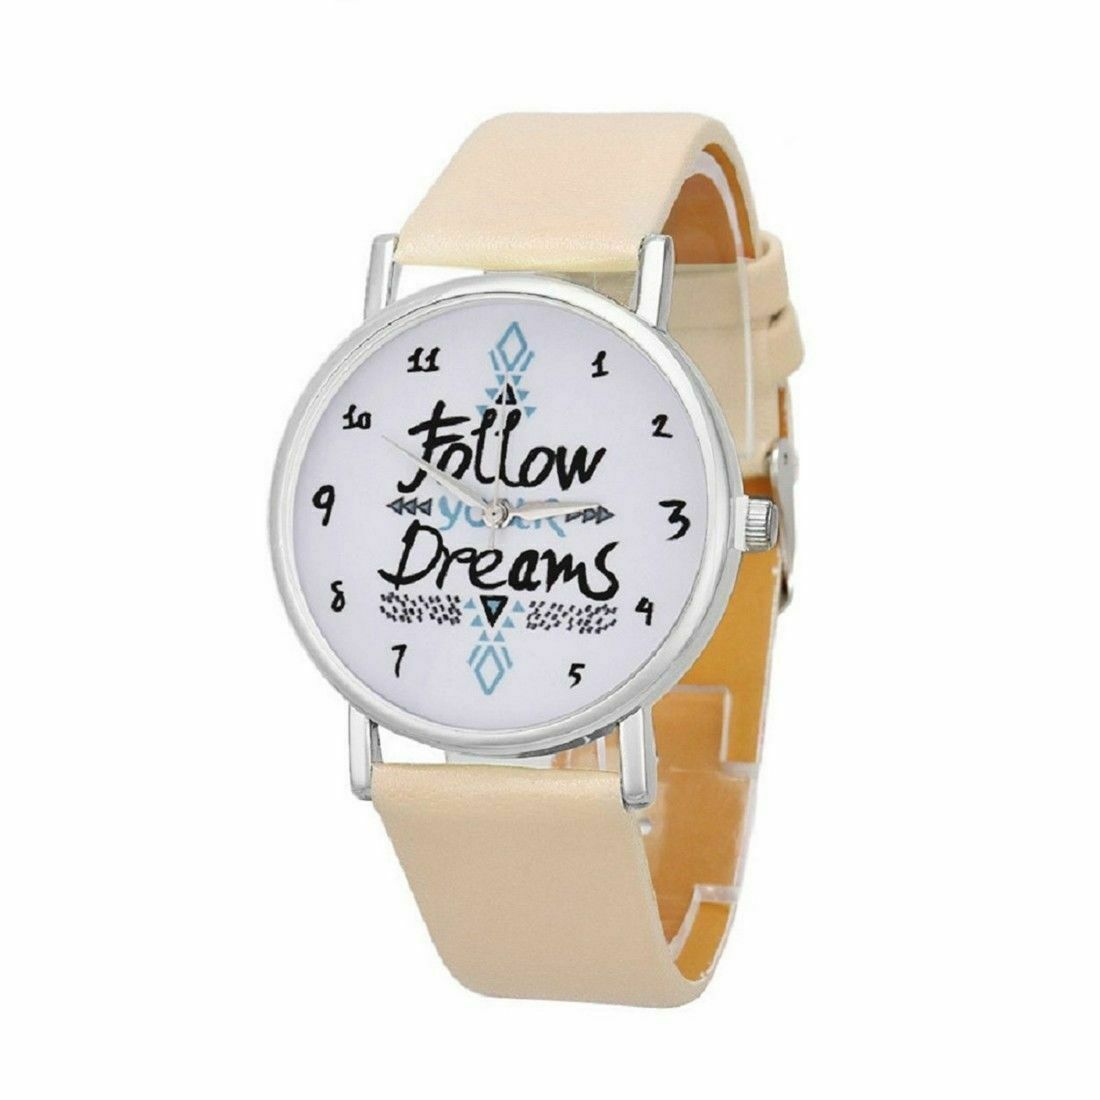 LADIES/UNISEX "FOLLOW YOUR DREAMS" WATCH CLOTTED CREAM COLOUR SOFT LEATHER STRAP